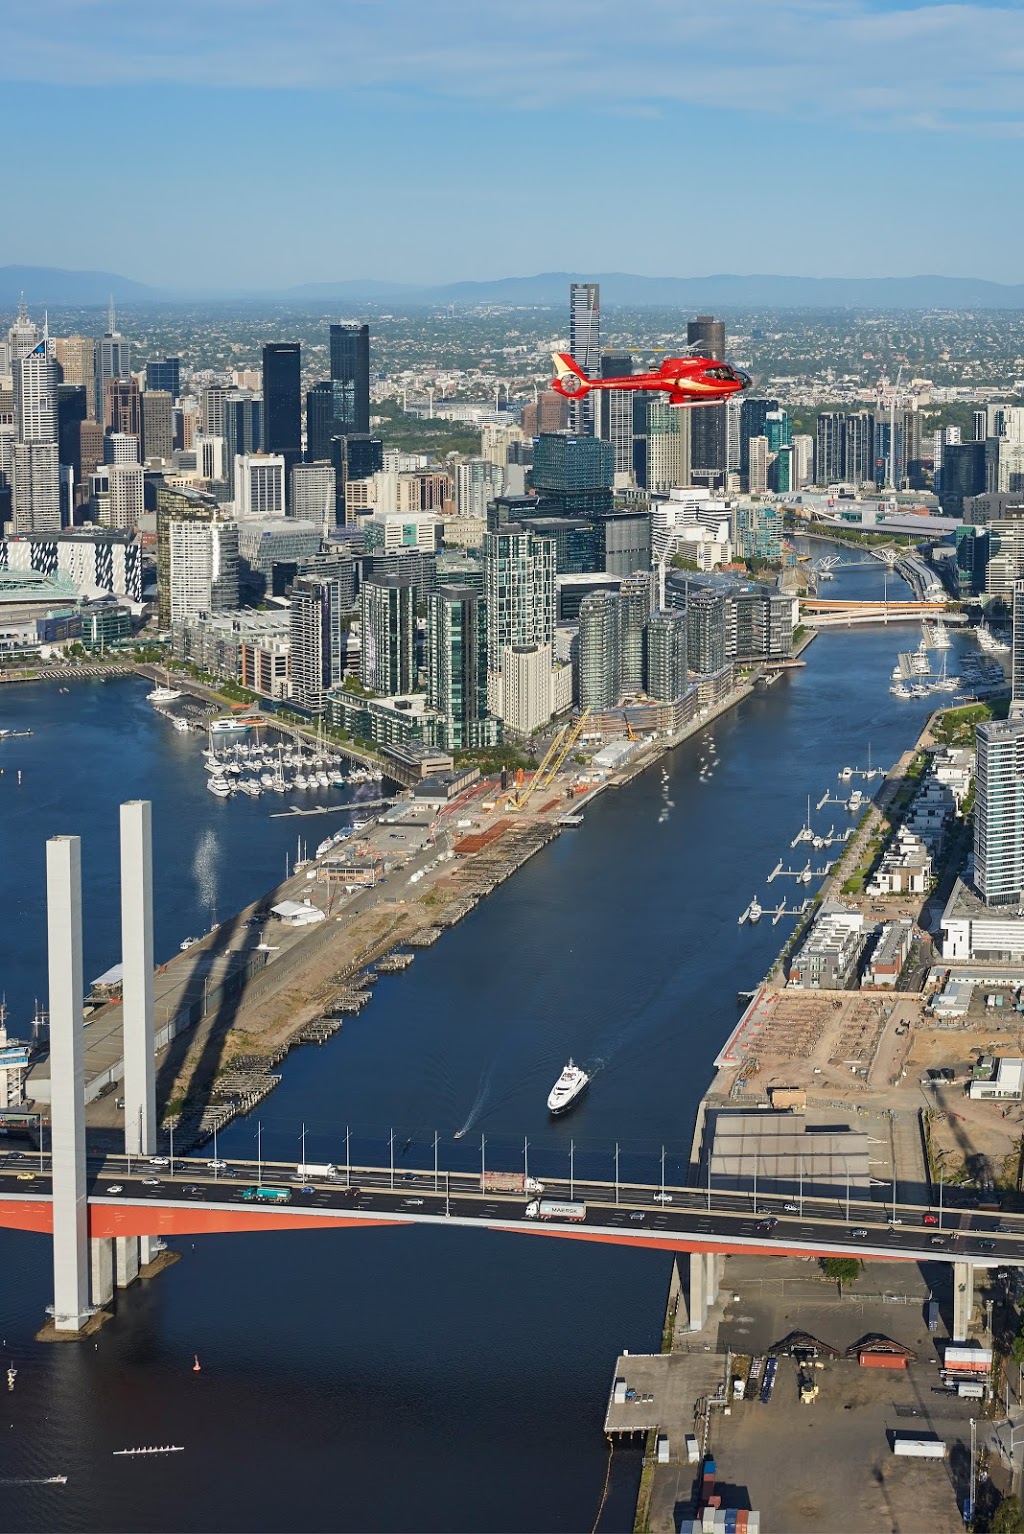 Microflite Helicopter Services | 27/31 Northern Ave, Moorabbin Airport VIC 3194, Australia | Phone: (03) 8587 9700